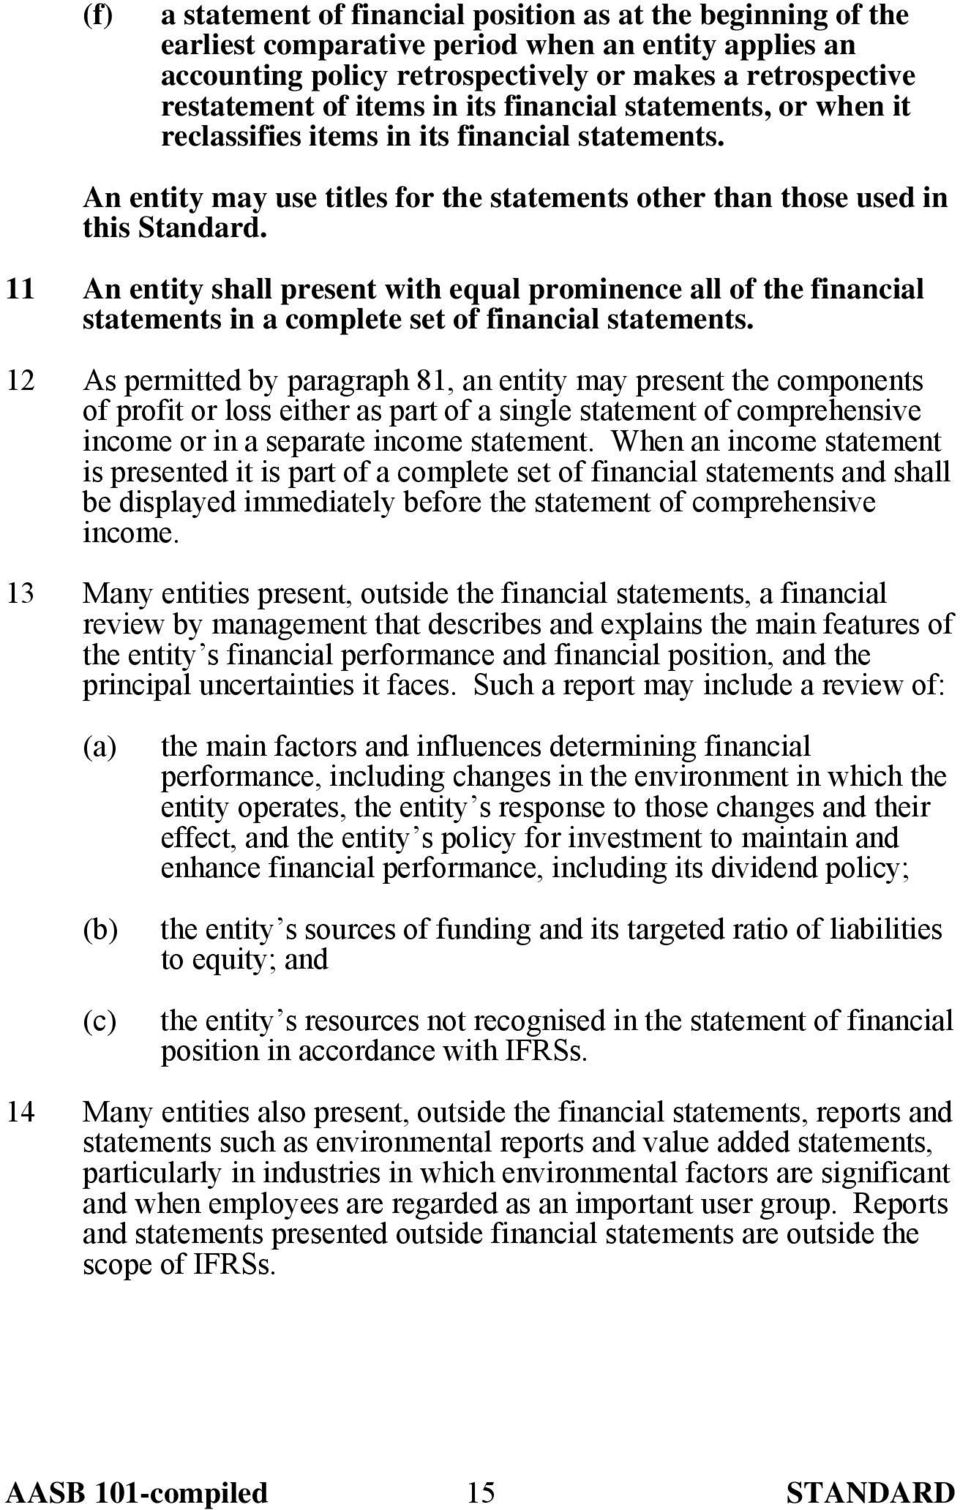 11 An entity shall present with equal prominence all of the financial statements in a complete set of financial statements.